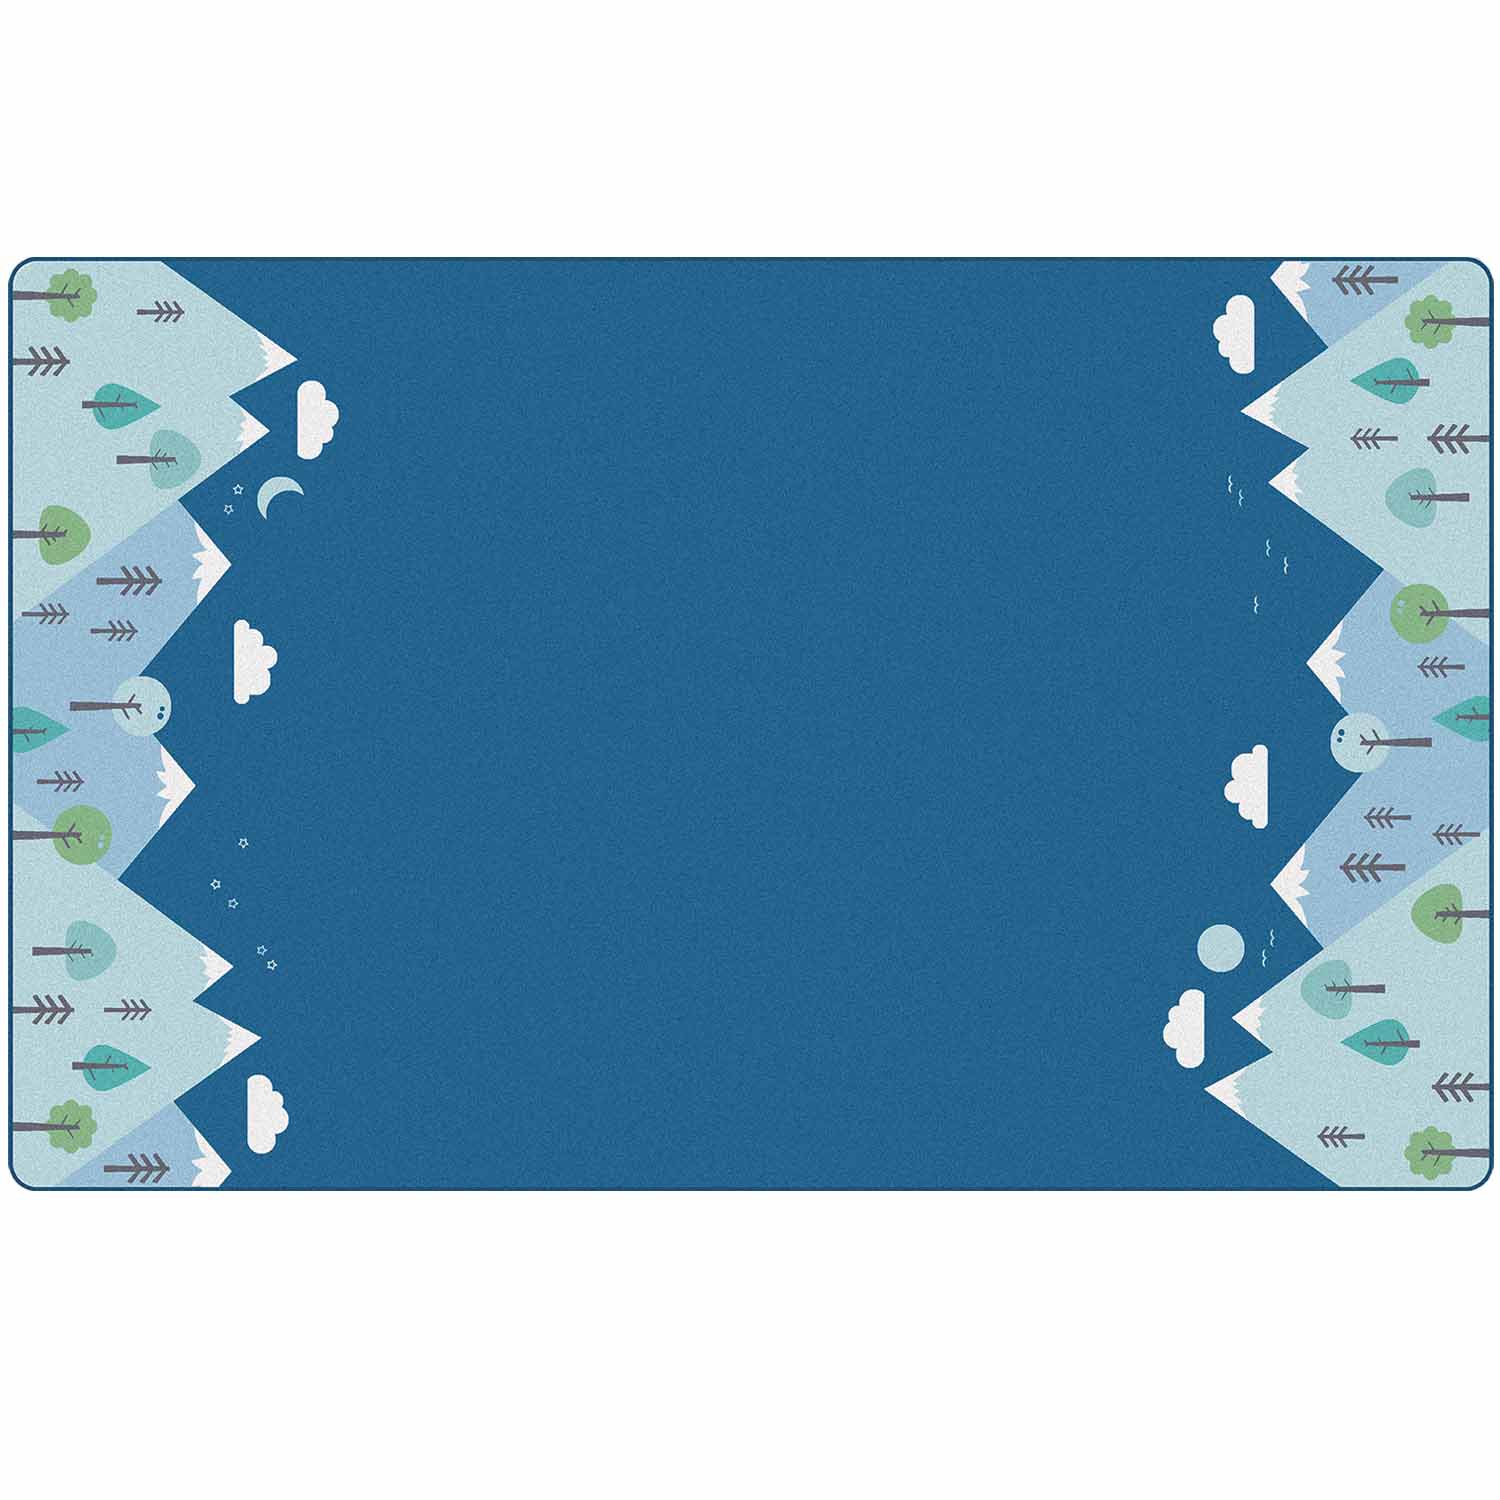 KIDSoft™ Tranquil Mountain Rug, Blue 4' x 6' Rectangle